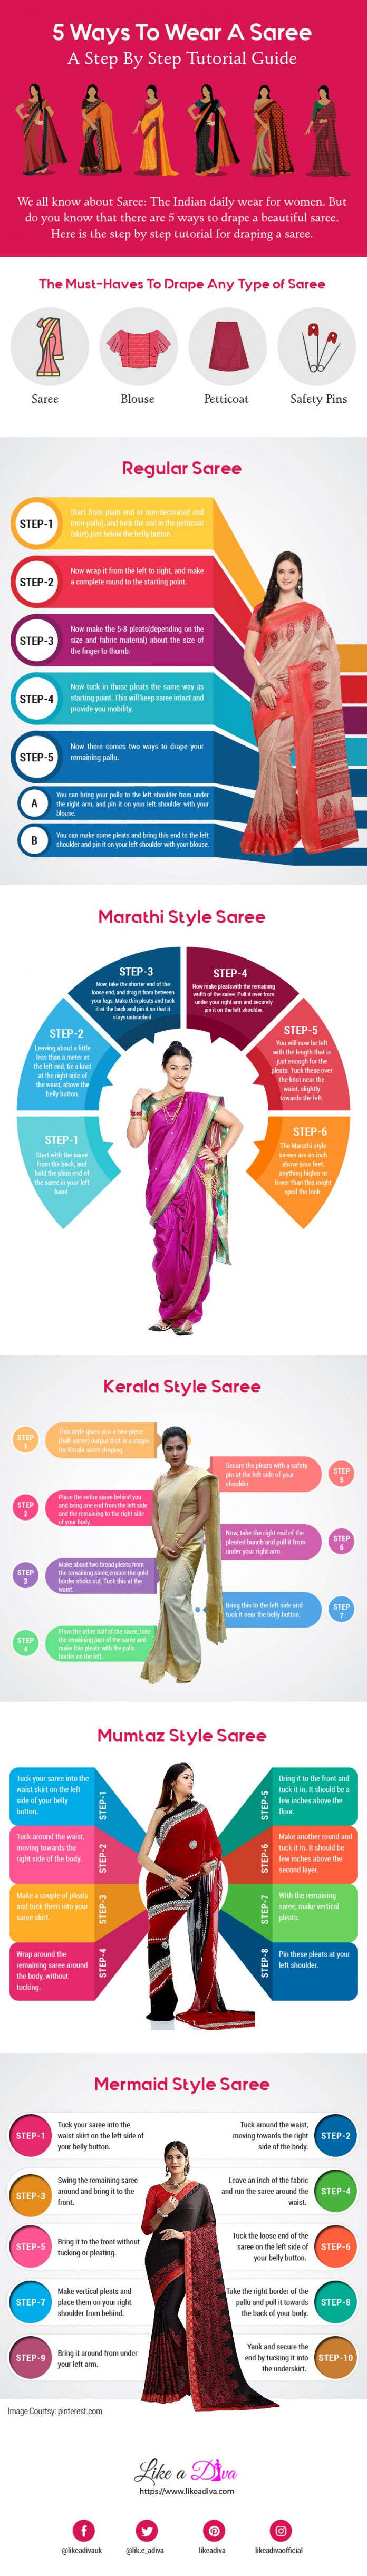 5 Different Styles to Wear a Saree: A Step By Step Tutorial Guide